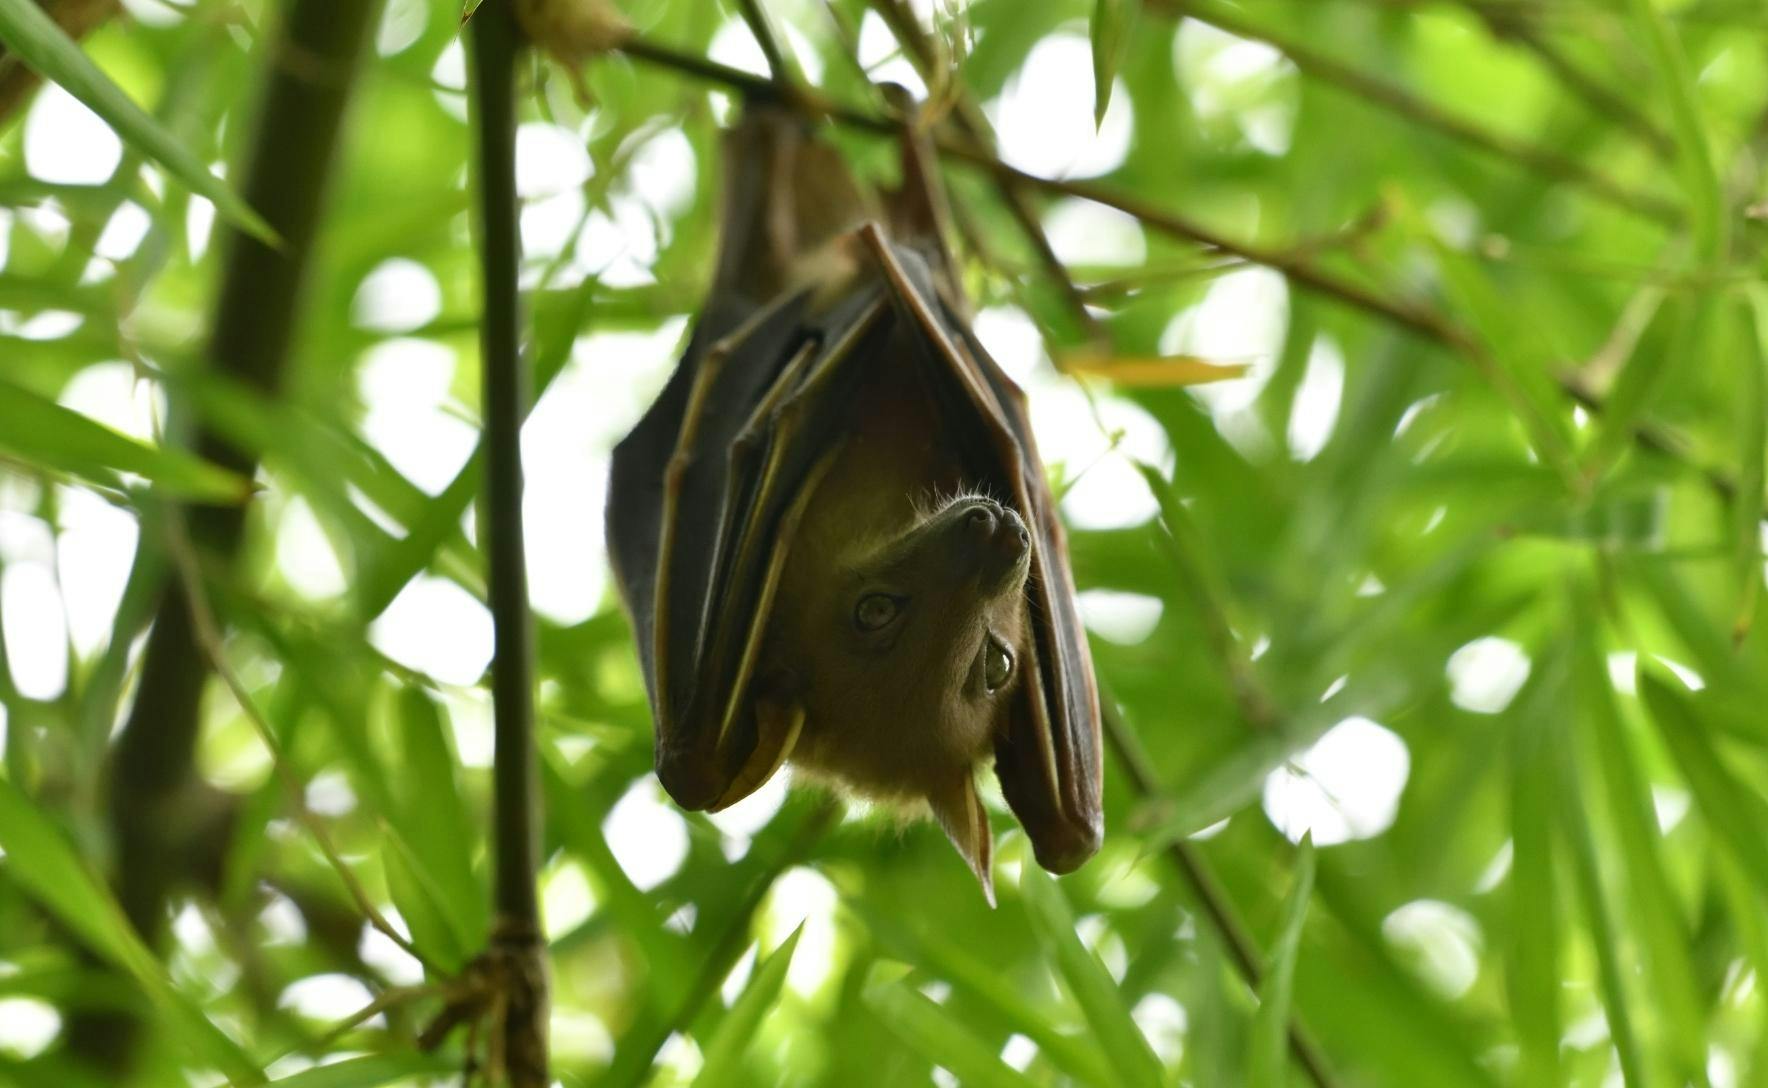 A brown bat hangs upside down in a green tree and looks into the camera.